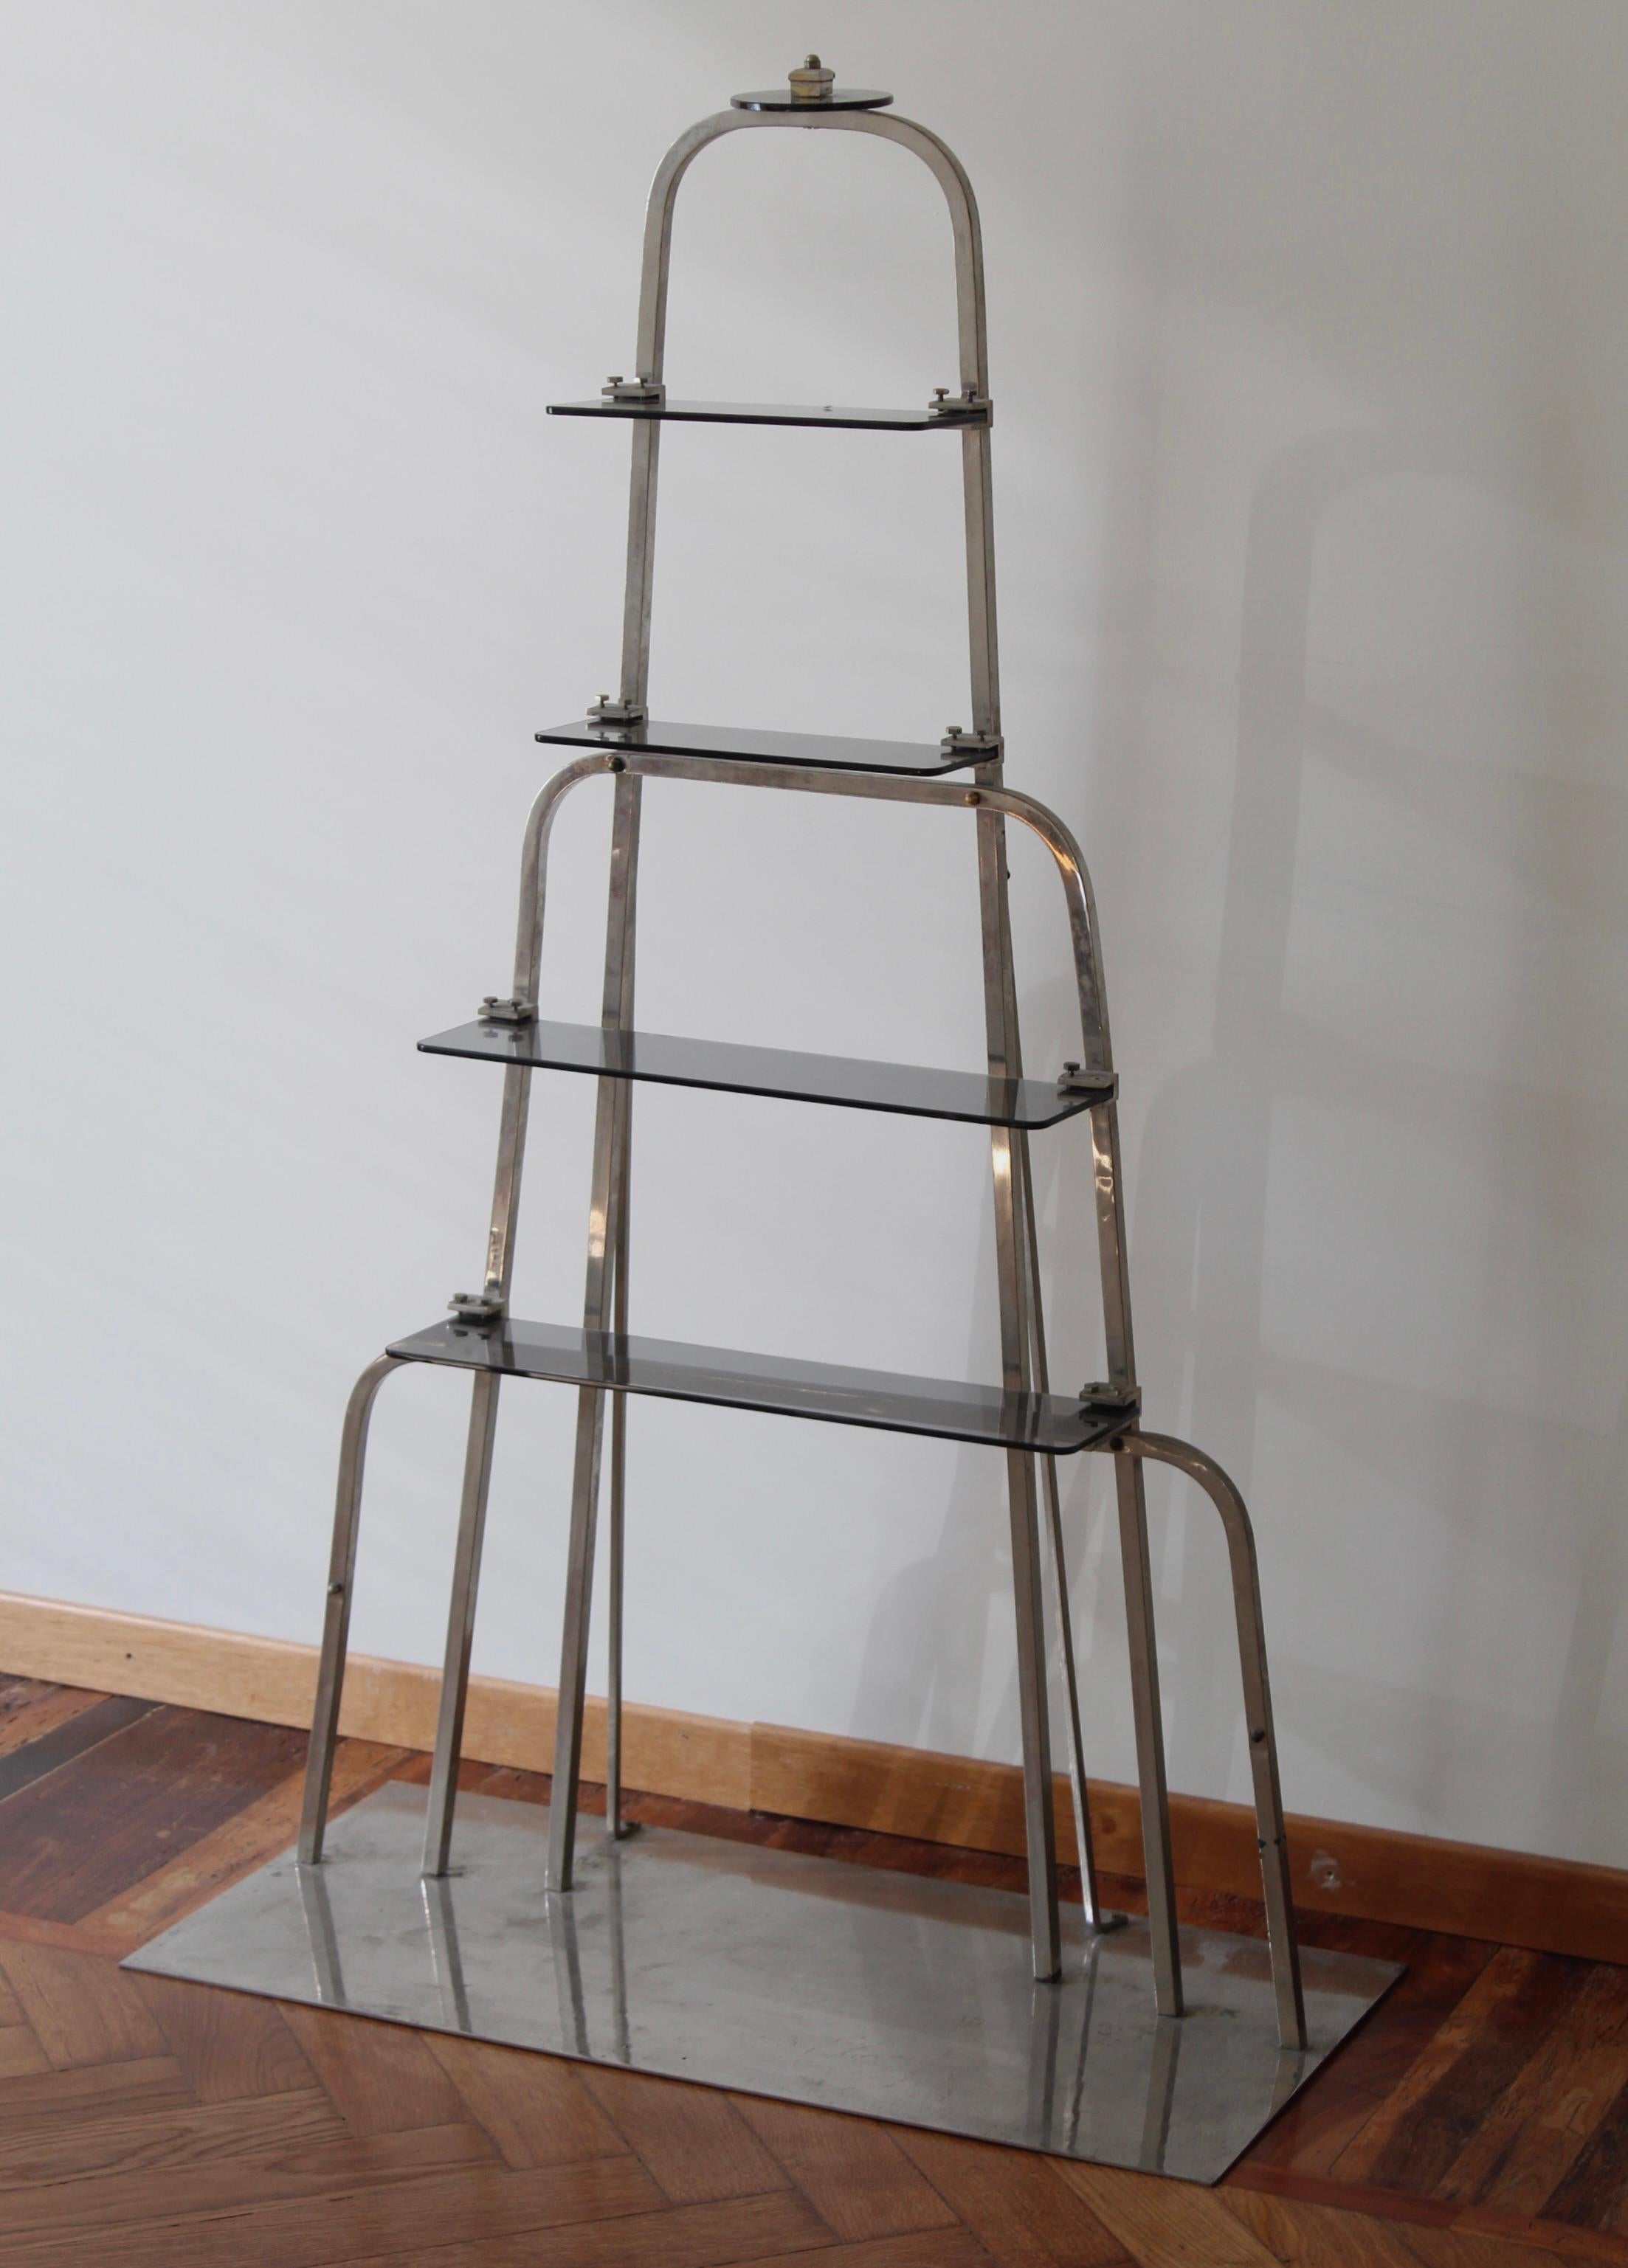 A small bookcase or etagere, designed and produced in Italy, 1940s. Executed in chrome-plated metal and smoked glass, originally a commission piece for a retail space in Milano.